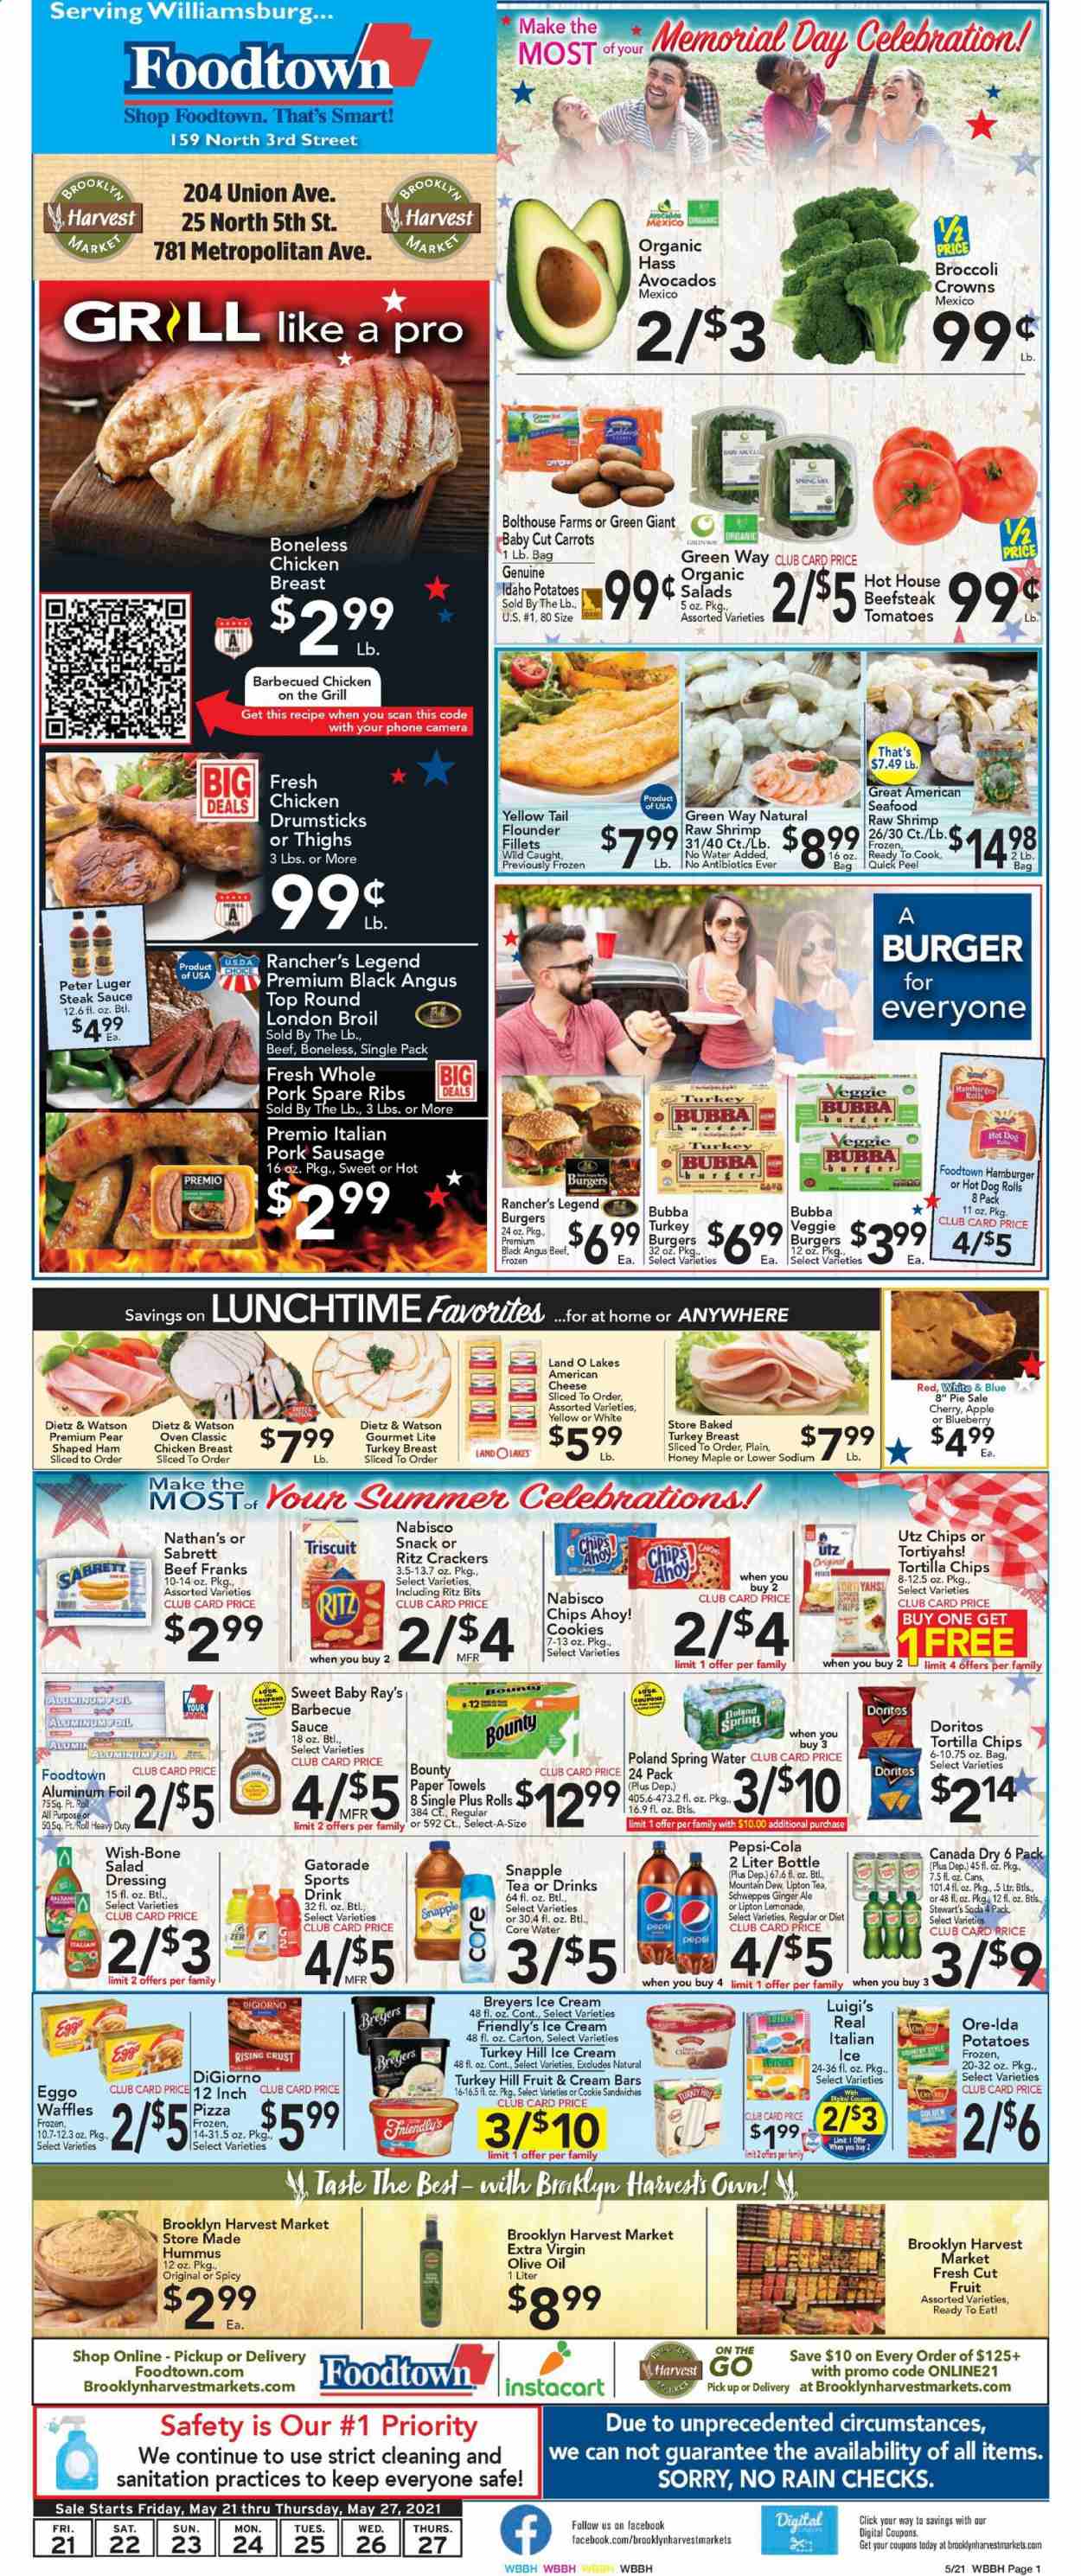 thumbnail - Foodtown Flyer - 05/21/2021 - 05/27/2021 - Sales products - hot dog rolls, burger buns, waffles, tomatoes, potatoes, avocado, pears, flounder, seafood, shrimps, pizza, sandwich, sauce, veggie burger, ham, Dietz & Watson, sausage, pork sausage, hummus, american cheese, eggs, ice cream, Friendly's Ice Cream, Ore-Ida, cookies, snack, Bounty, crackers, Chips Ahoy!, RITZ, Doritos, tortilla chips, BBQ sauce, steak sauce, dressing, extra virgin olive oil, olive oil, honey, Canada Dry, ginger ale, lemonade, Mountain Dew, Schweppes, Pepsi, soda, Lipton, Snapple, Gatorade, spring water, tea, beer, turkey breast, beef meat, steak, pork meat, pork ribs, pork spare ribs, kitchen towels, paper towels, aluminium foil. Page 1.